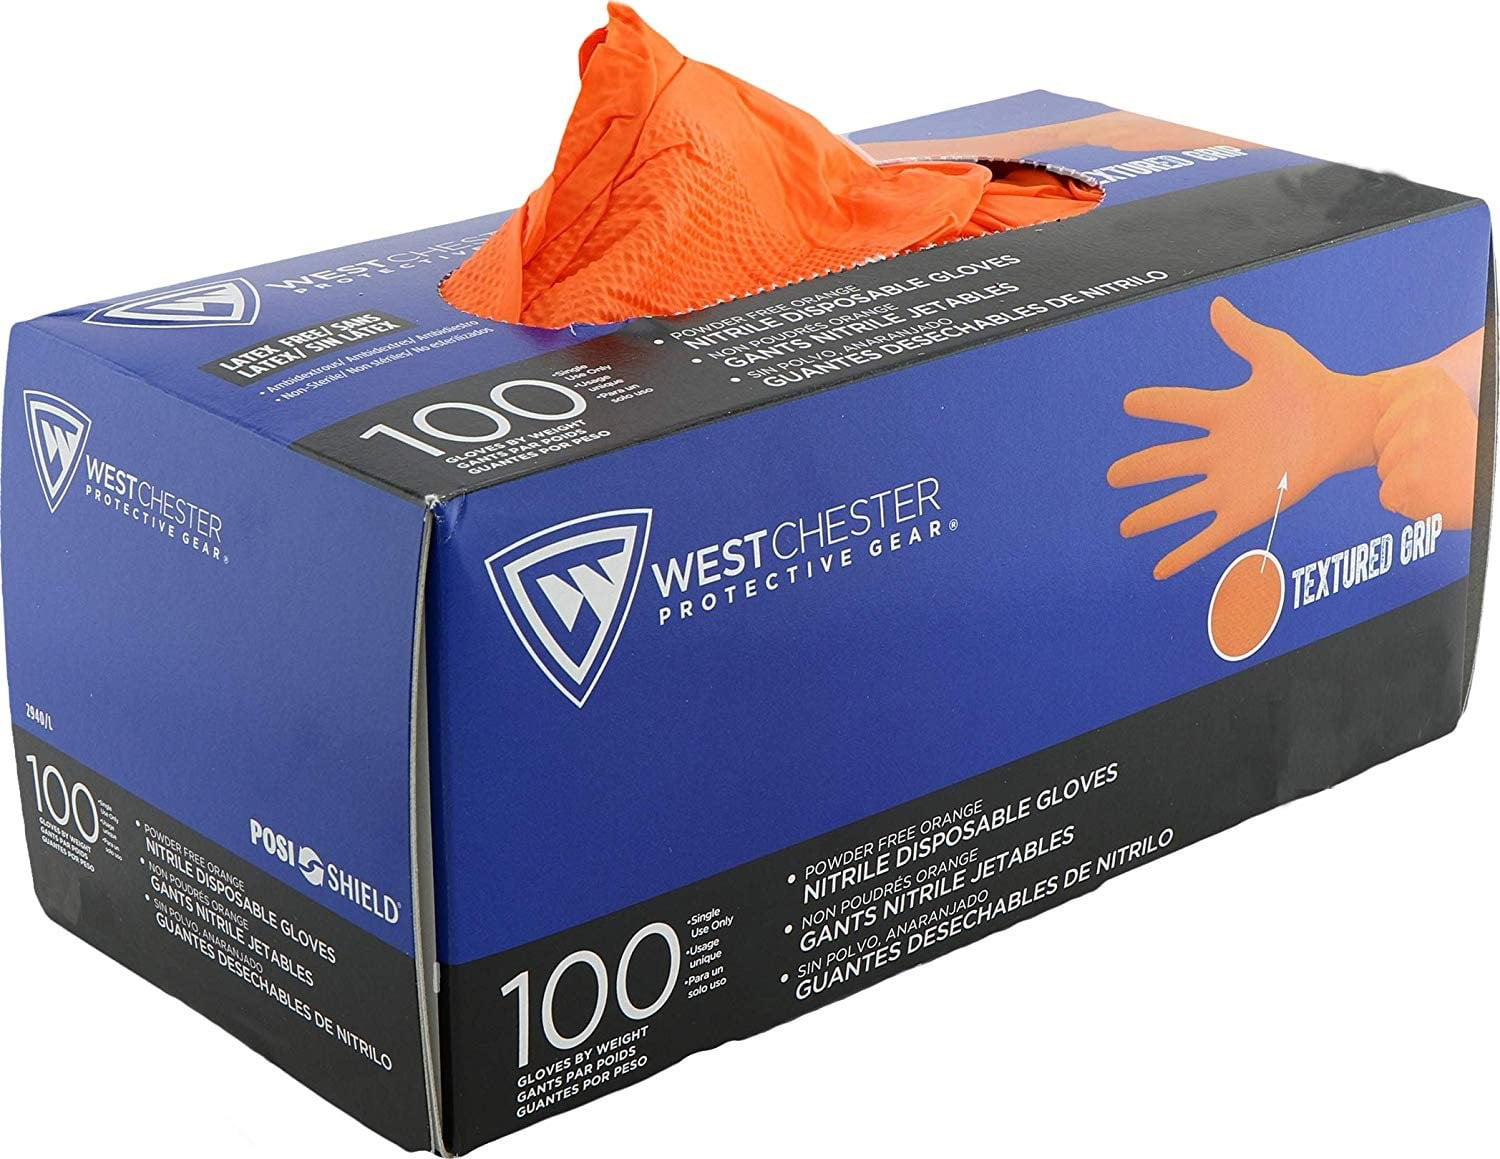 7 mil 10 Boxes of 100 Commercial Powder Free Disposable Nitrile Gloves 1000 240mm Micro Diamond Textured Orange Size M 